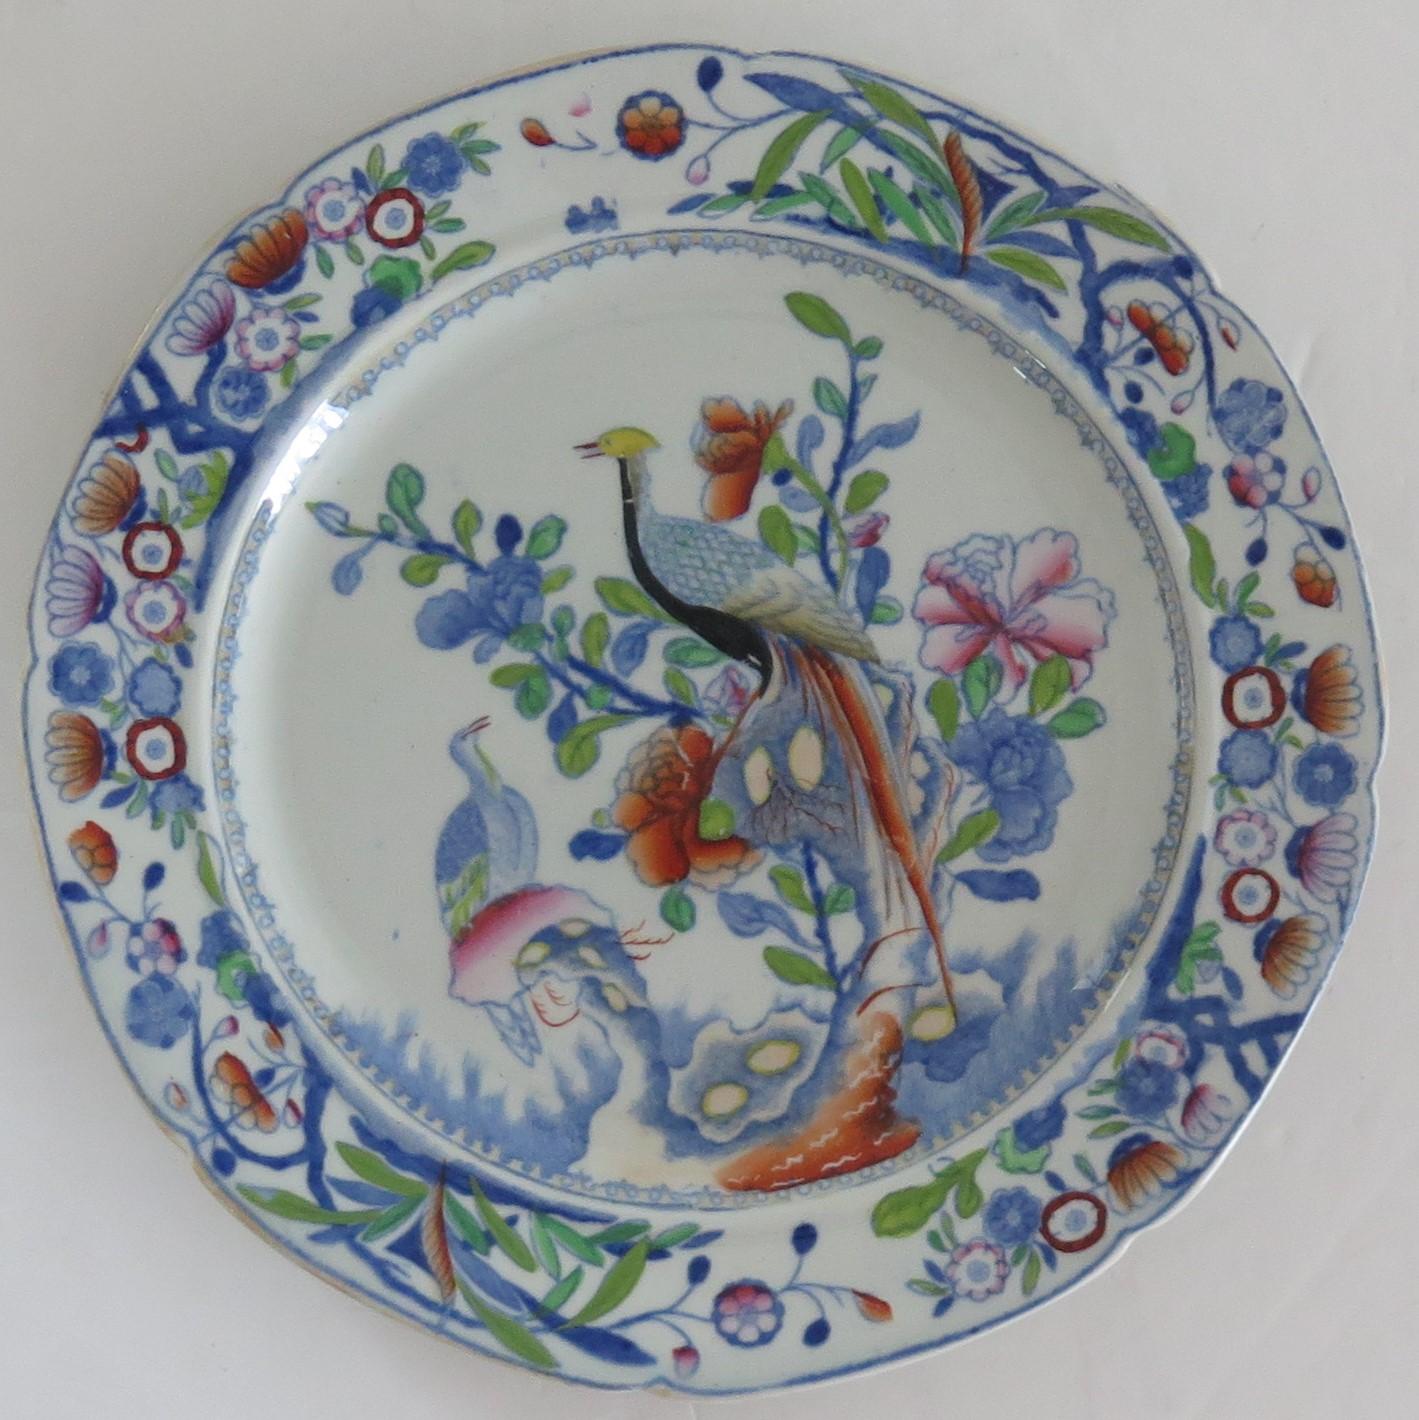 This is a very decorative Side Plate by Mason's Ironstone, Lane Delph, England in the Oriental Pheasant pattern, dating to the early period of Mason's ironstone, circa 1818.

The plate is circular in shape with a notched rim and is decorated in